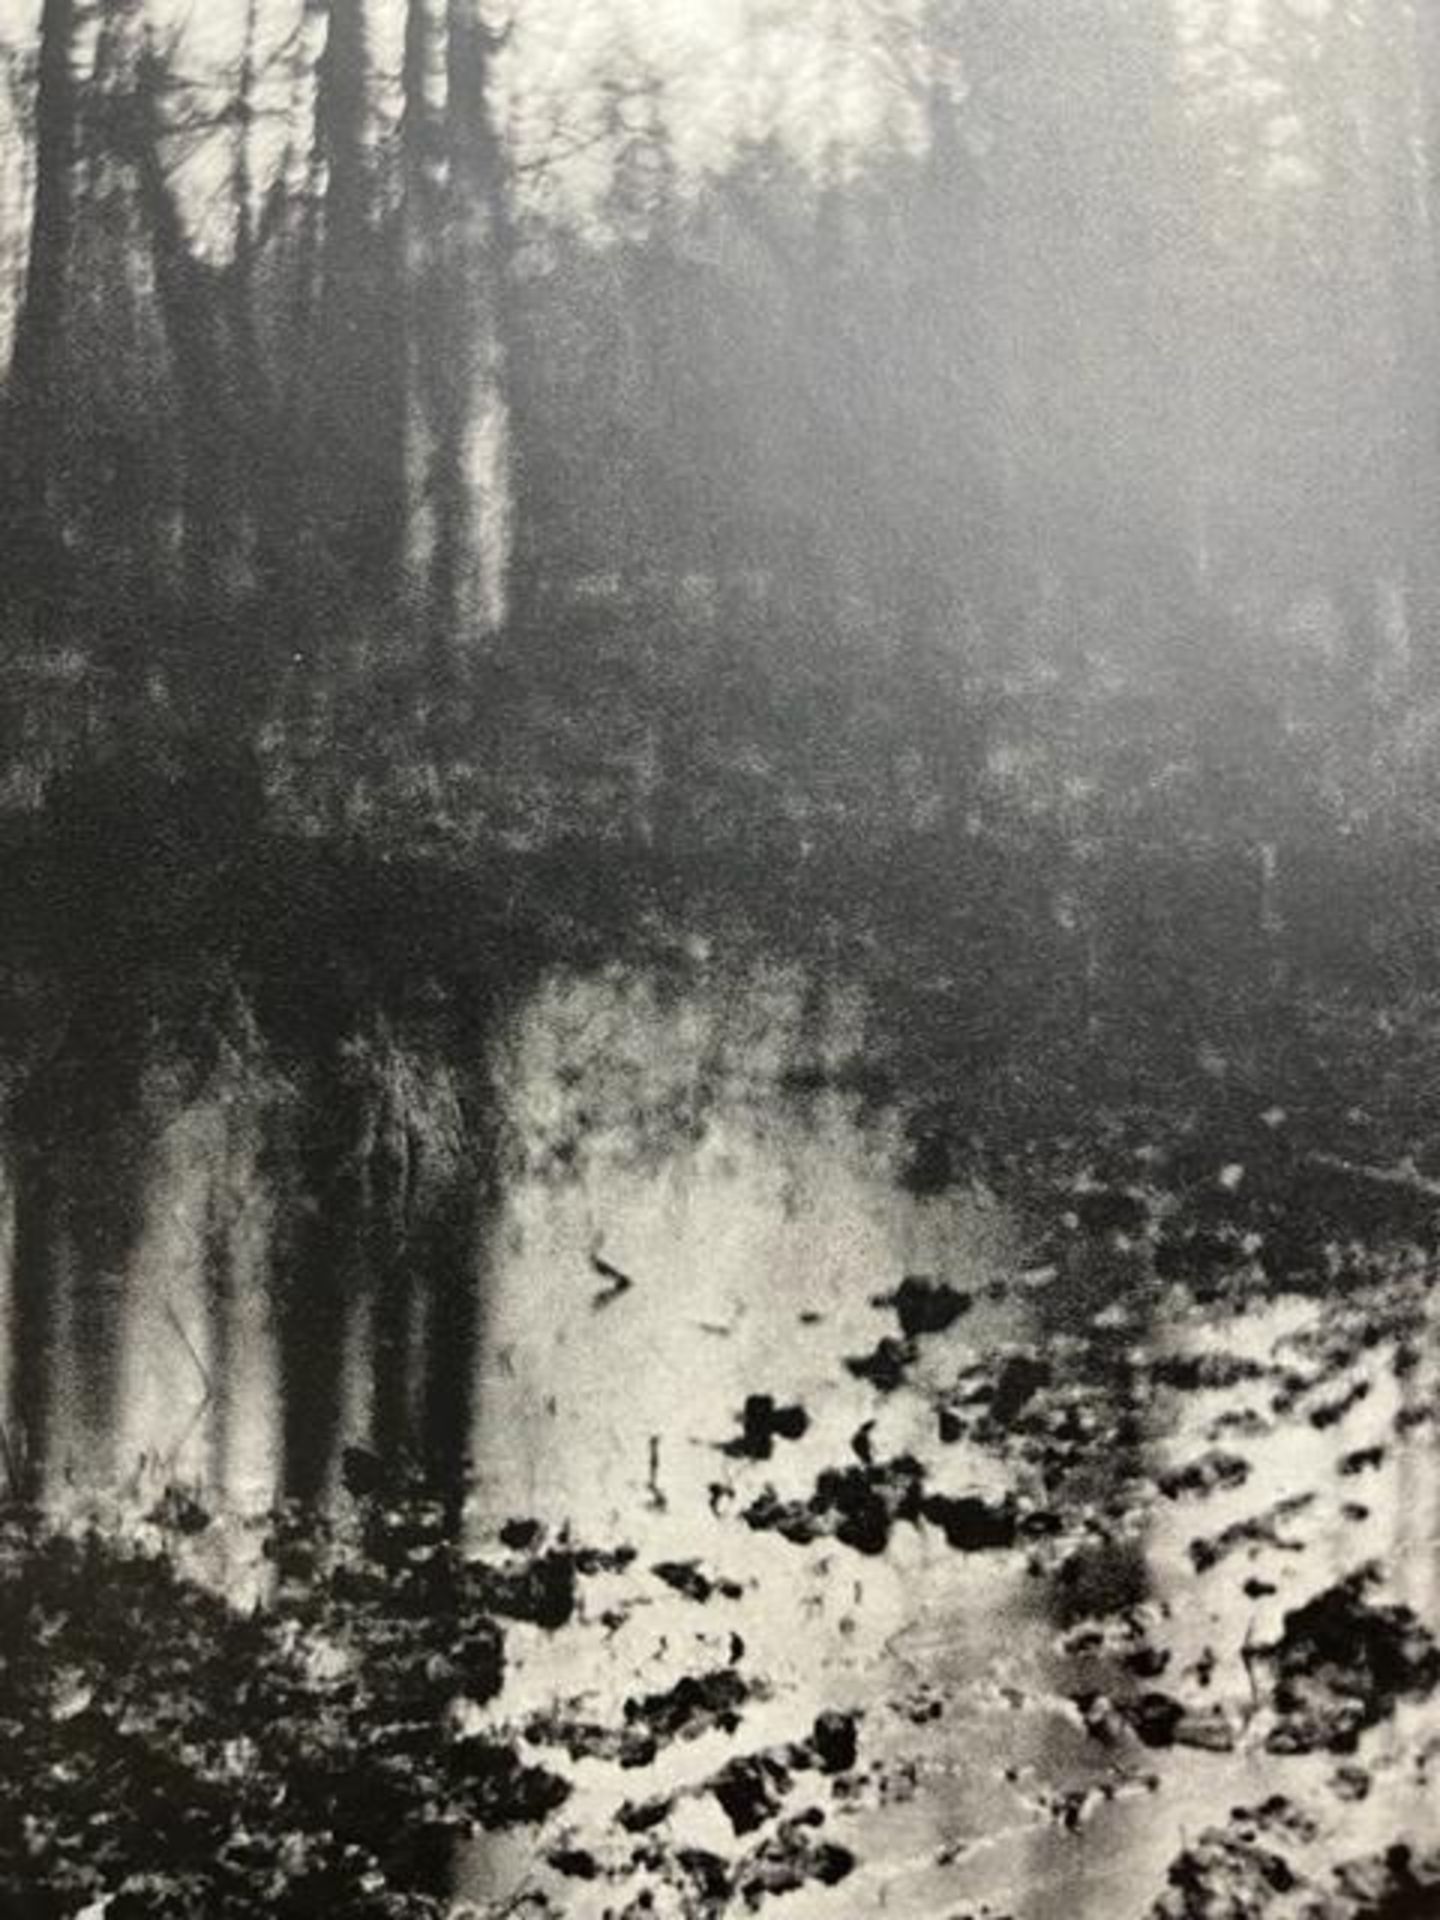 Edward Steichen "The Pool - Evening" Print. - Image 3 of 6